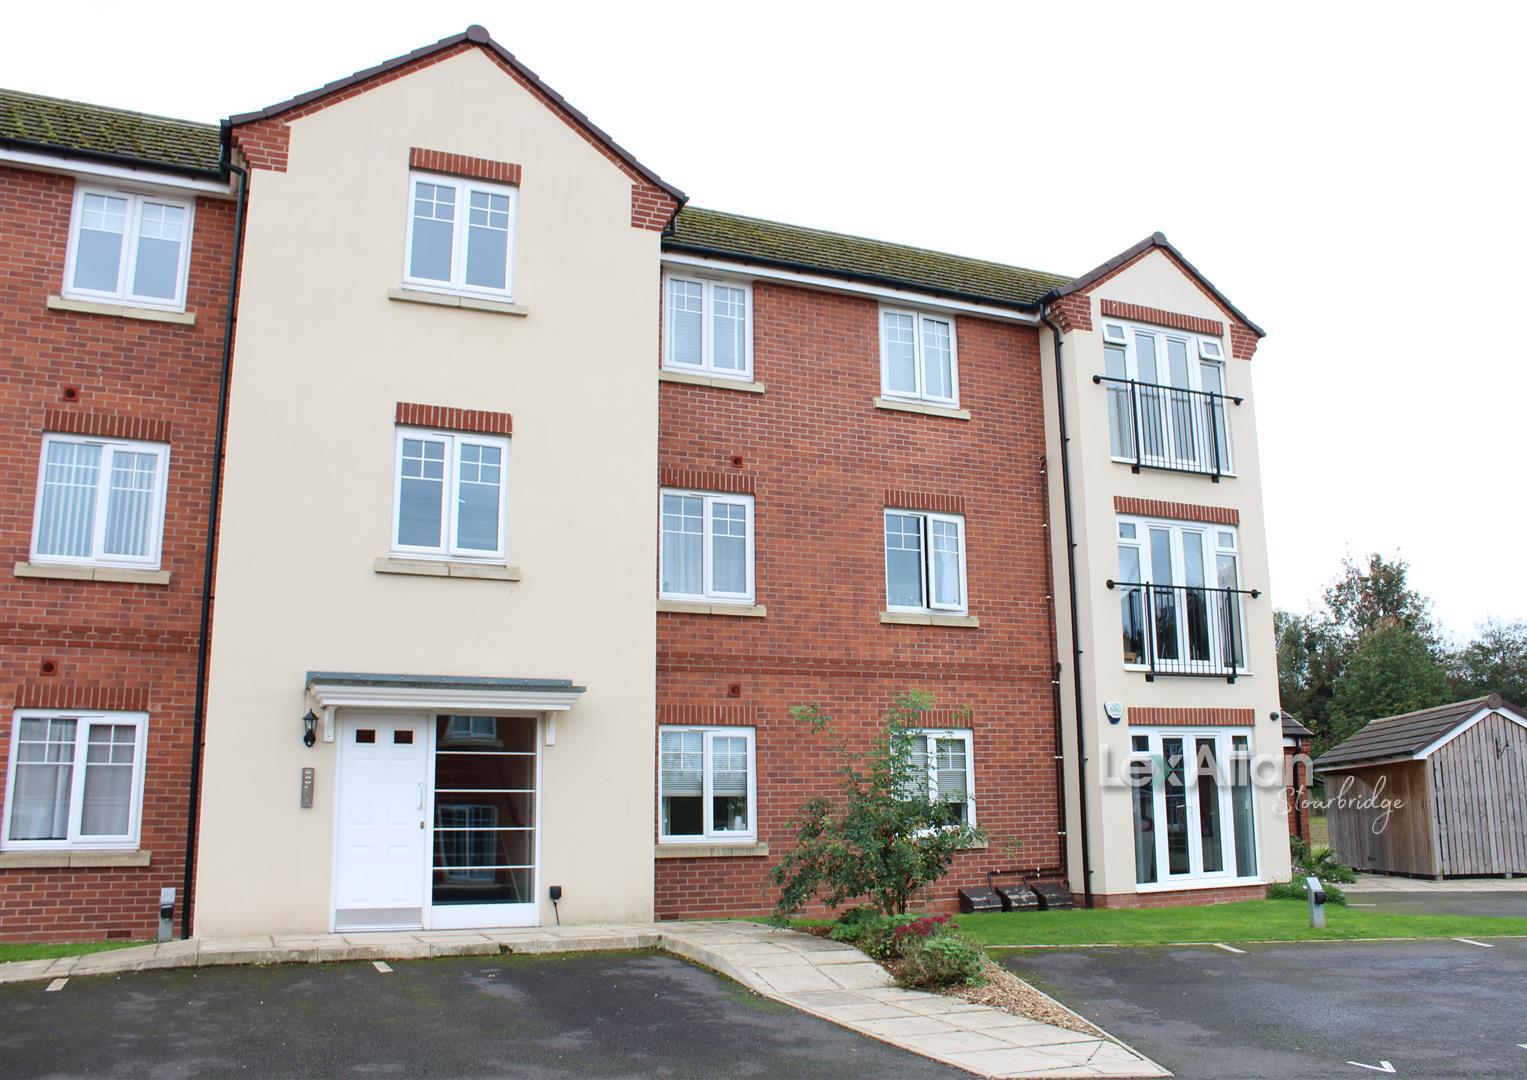 2 bed apartment for sale in Fussell Way, Stourbridge - Property Image 1